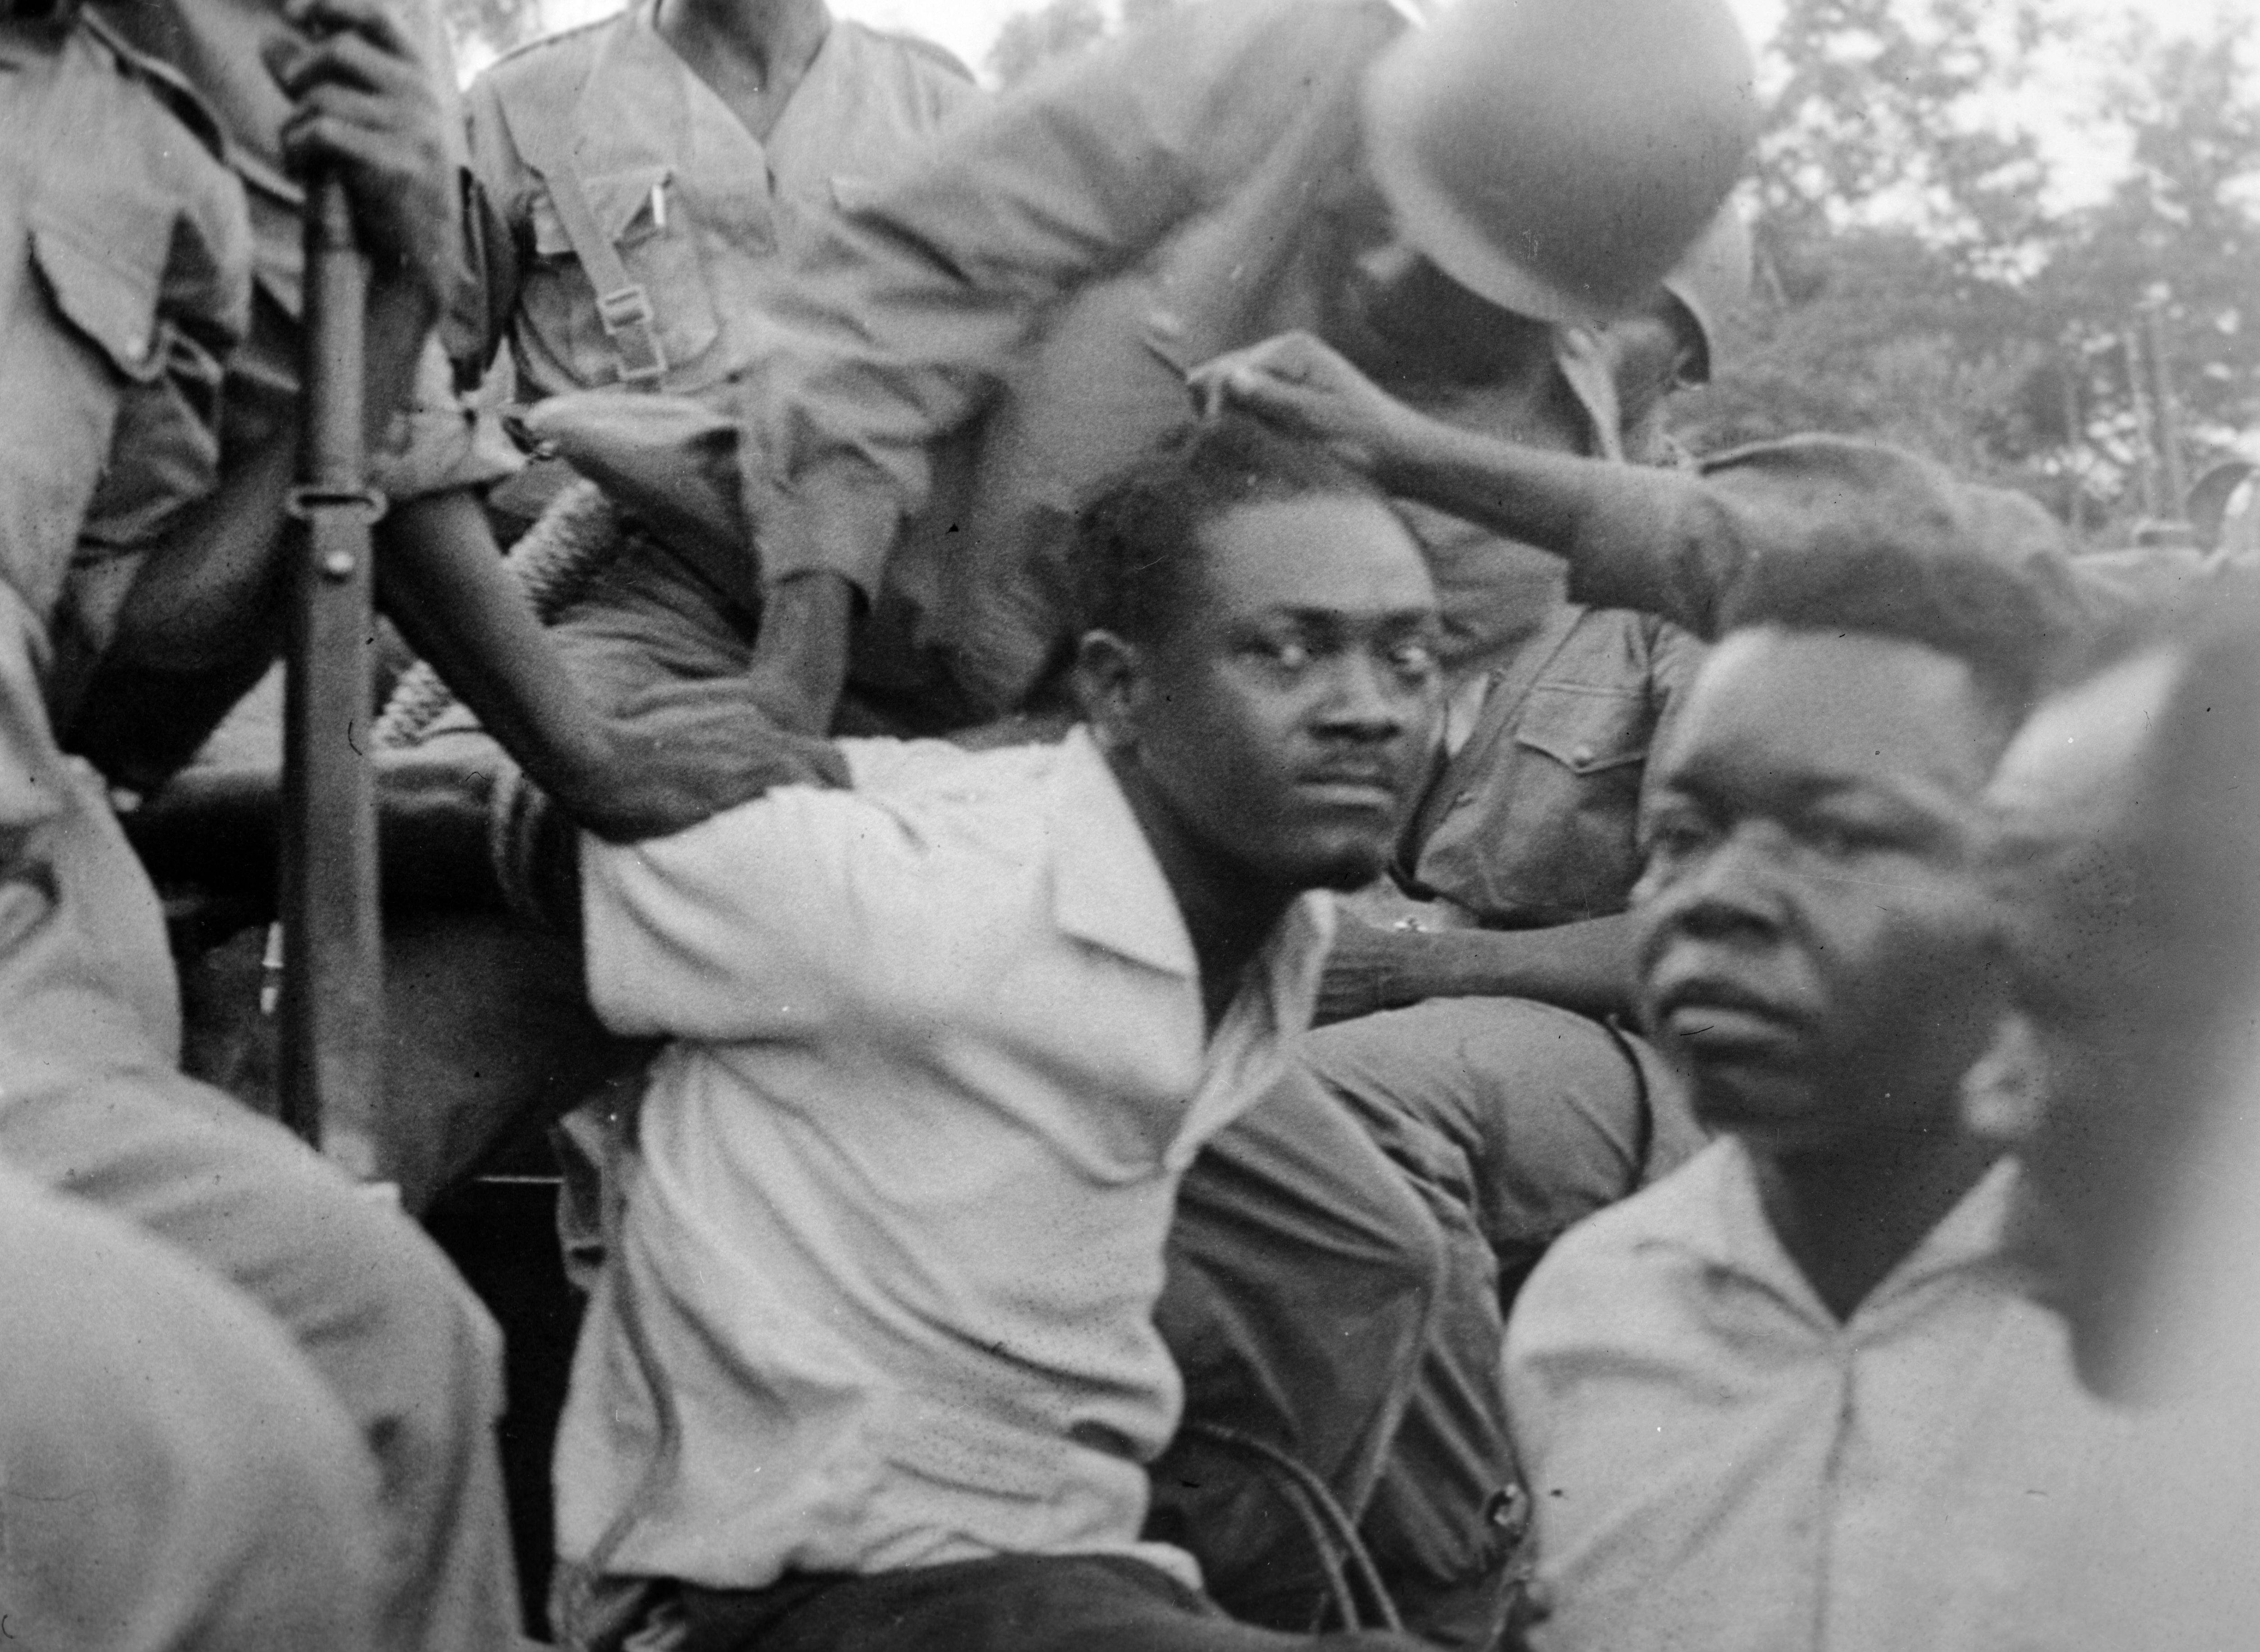 Bildnummer: 59984083  Datum: 25.12.1964  Copyright: imago/United Archives International
Leopoldville : A group of soldiers of Colonel Mobutu s forces roughly man handle ex Congo Premier Patrice Lumumba ( centre white shirt ) after he was brought here after his arrest here on December 3rd . 5 December 1961 kbdig 1964 quer 1960 , 60s , Sixties 19th Century , Nineteenth Century Soldiers Uniform  PUBLICATIONxINxGERxSUIxAUTxONLY 

 59984083 Date 25 12 1964 Copyright Imago United Archives International Leopoldville a Group of Soldiers of Colonel Mobutu S Forces roughly Man handle Ex Congo Premier Patrice Lumumba Centre White Shirt After he what BROUGHT Here After His Arrest Here ON December 3rd 5 December 1961 Kbdig 1964 horizontal 1960 60s Sixties 19th Century nineteenth Century Soldiers Uniform PUBLICATIONxINxGERxSUIxAUTxONLY